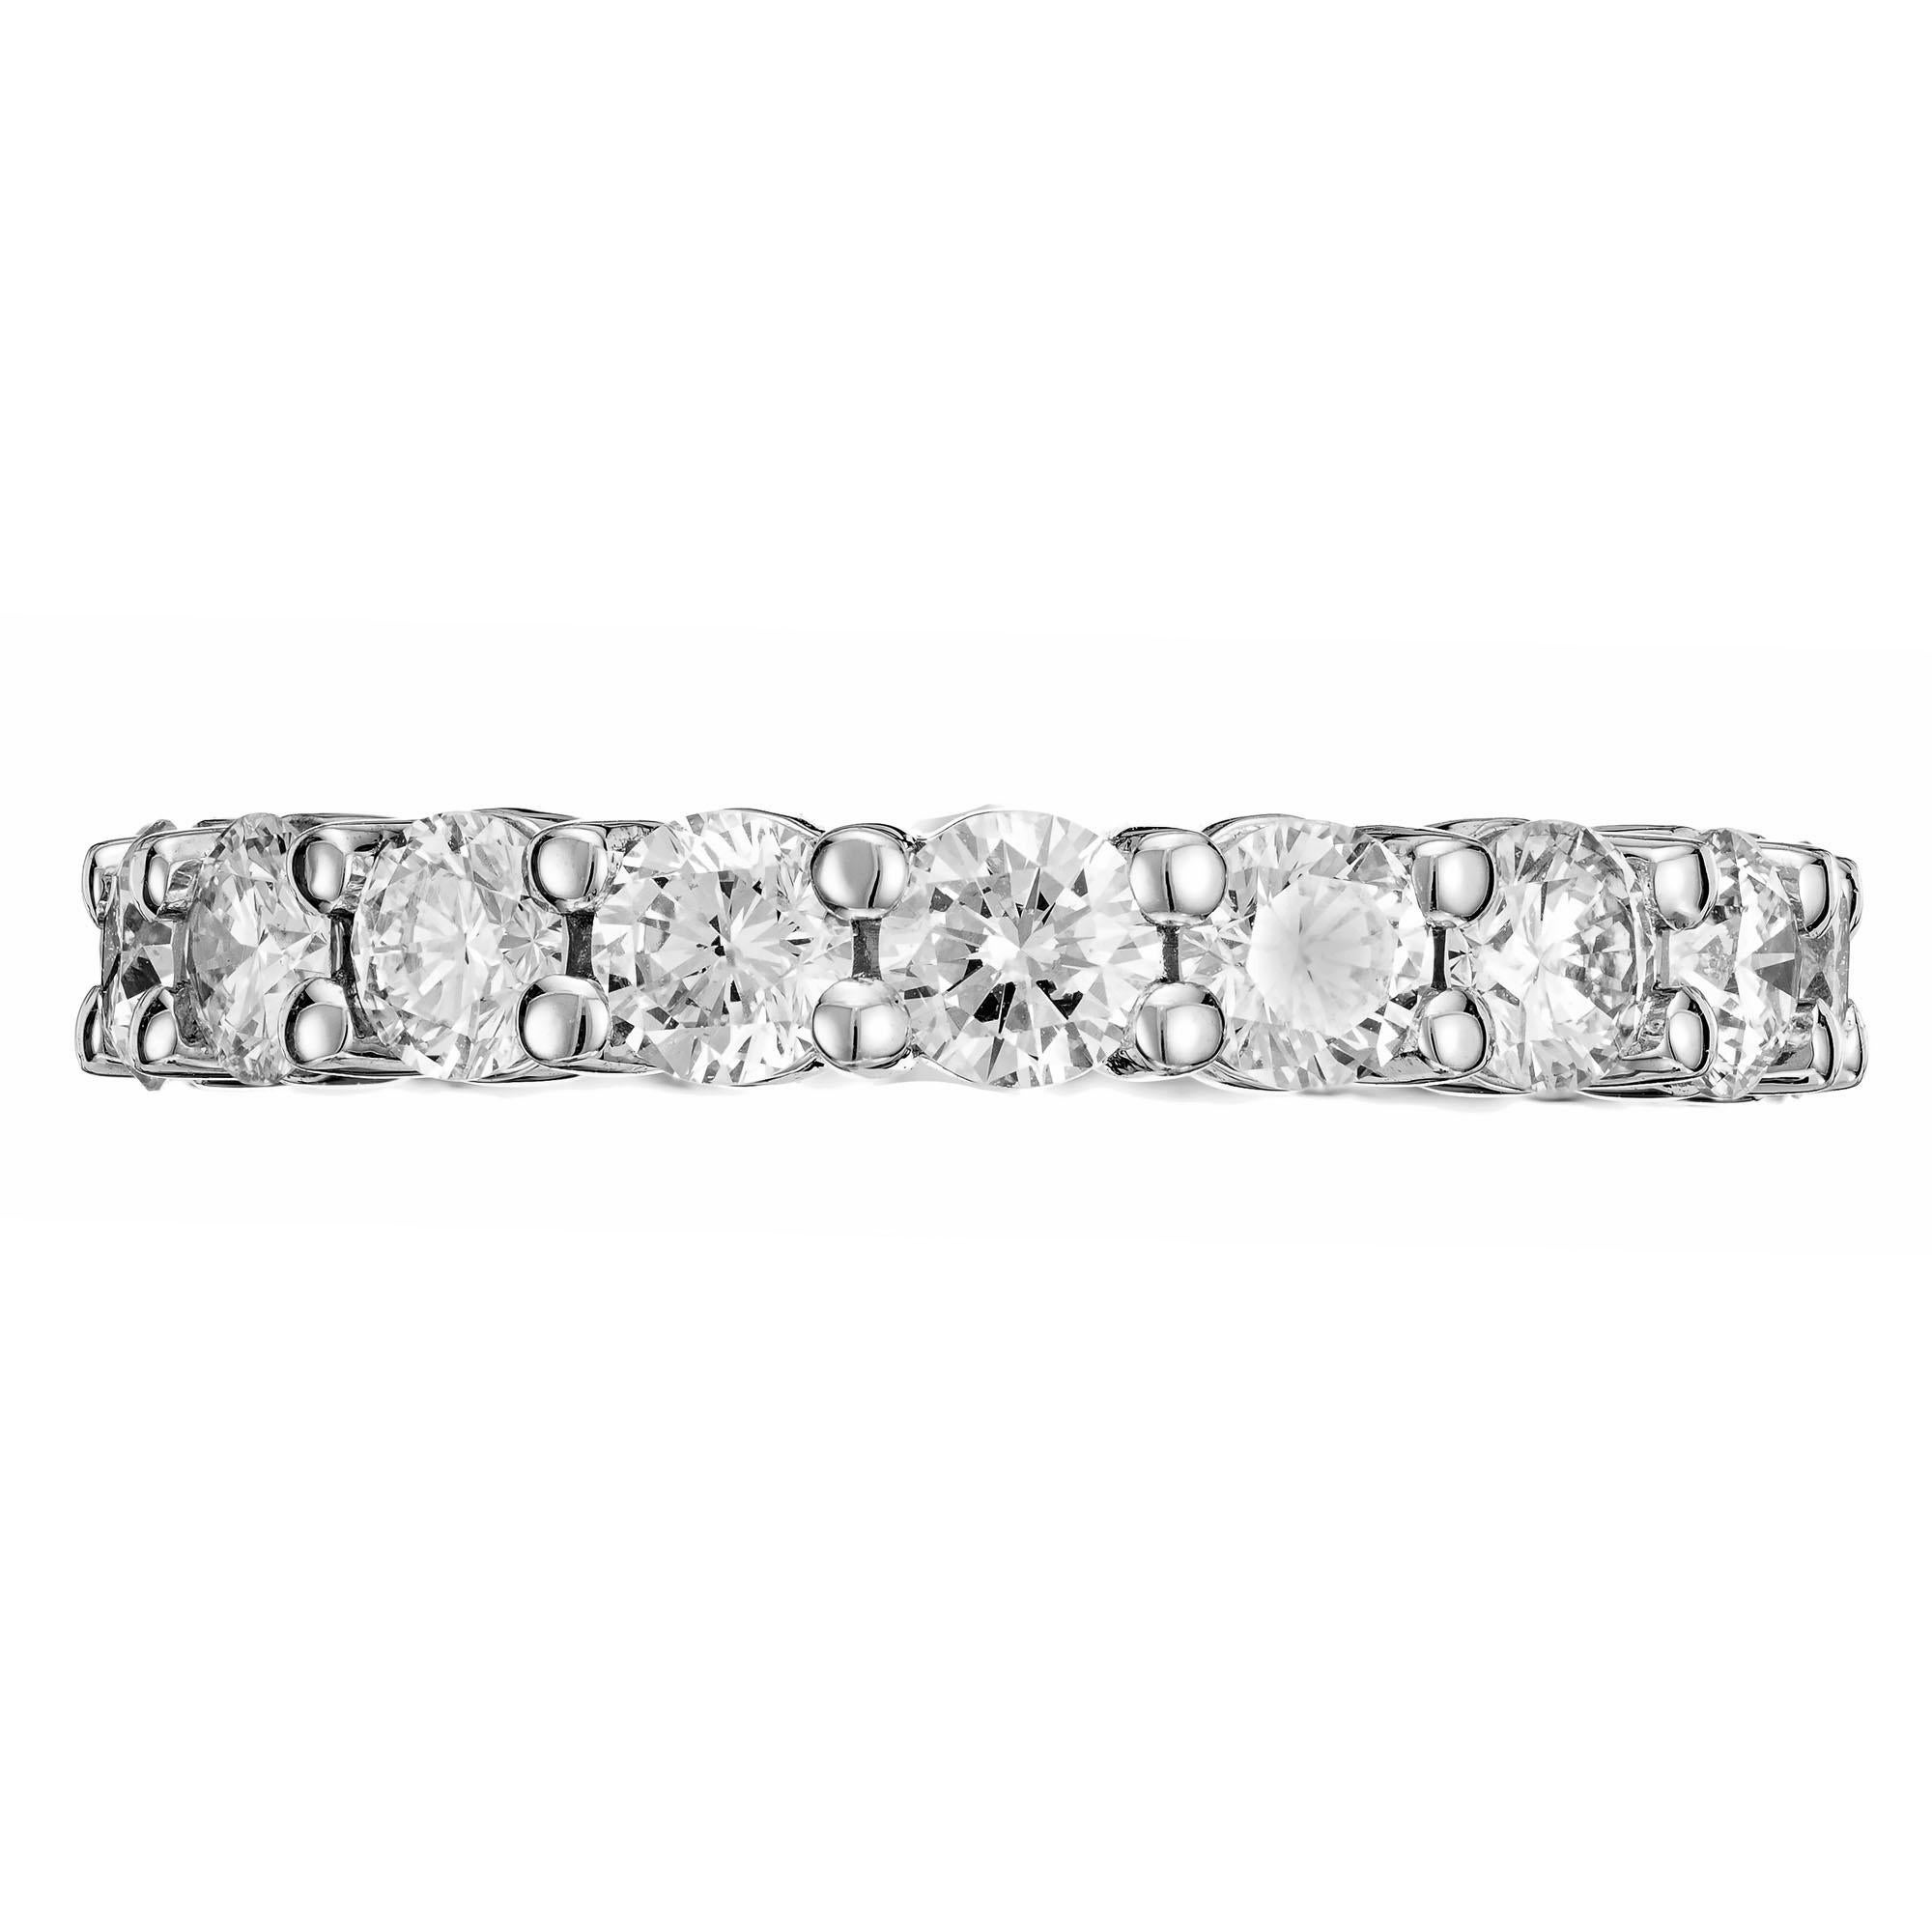 Common prong diamond eternity wedding band ring. 19 round brilliant cut diamonds set in platinum. Size 7 and not sizable. Can be costumed ordered in different sizes. Designed and crafted in the Peter Suchy workshop.

18 round brilliant cut diamonds,